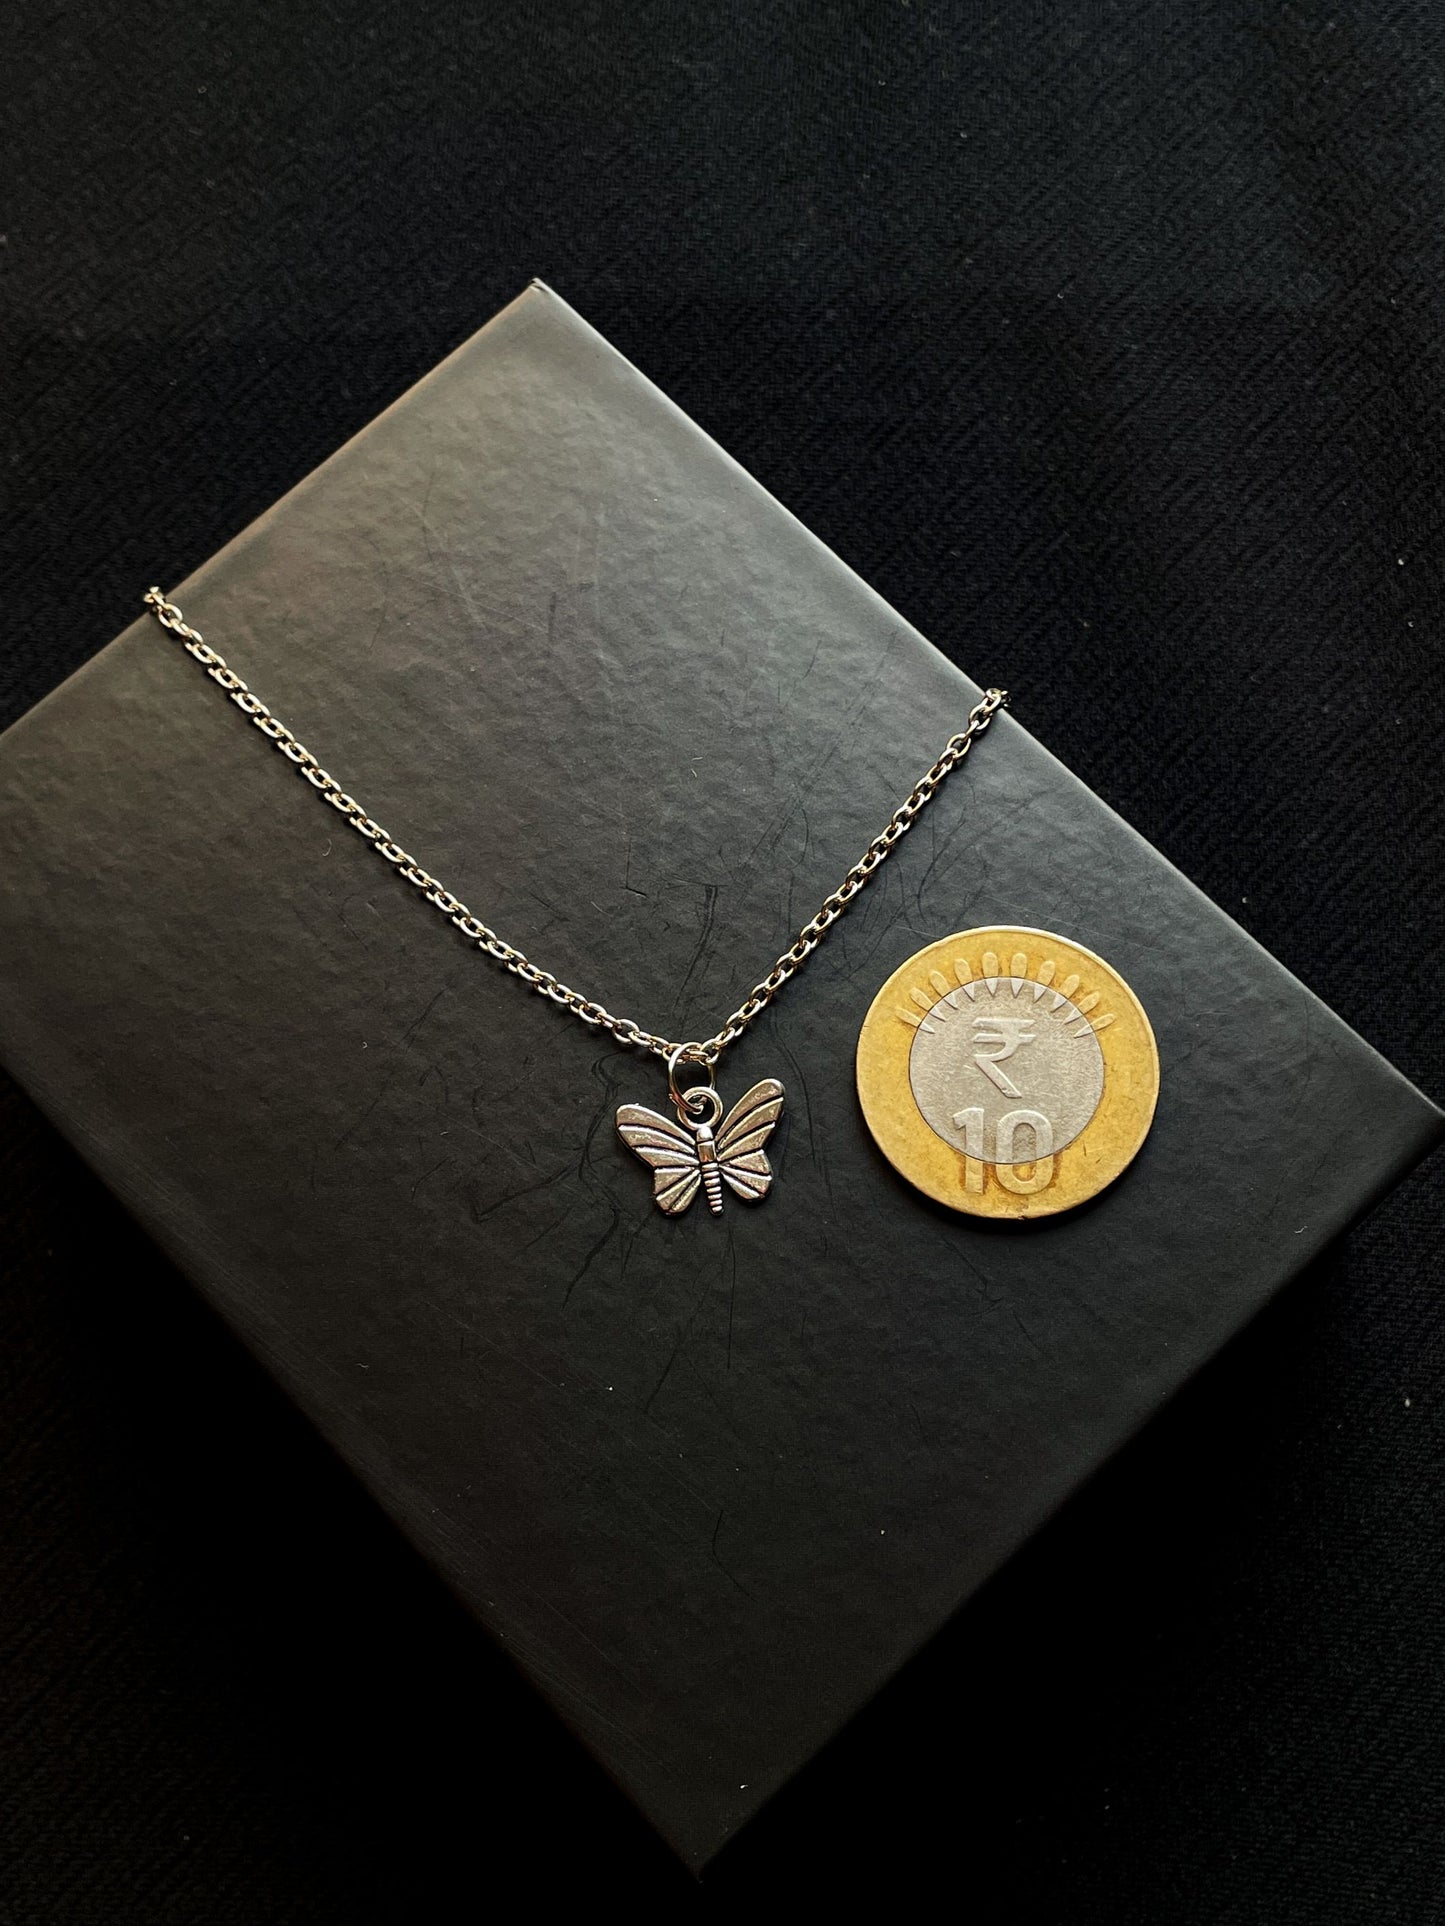 "The Butterfly Effect" Silver Charm